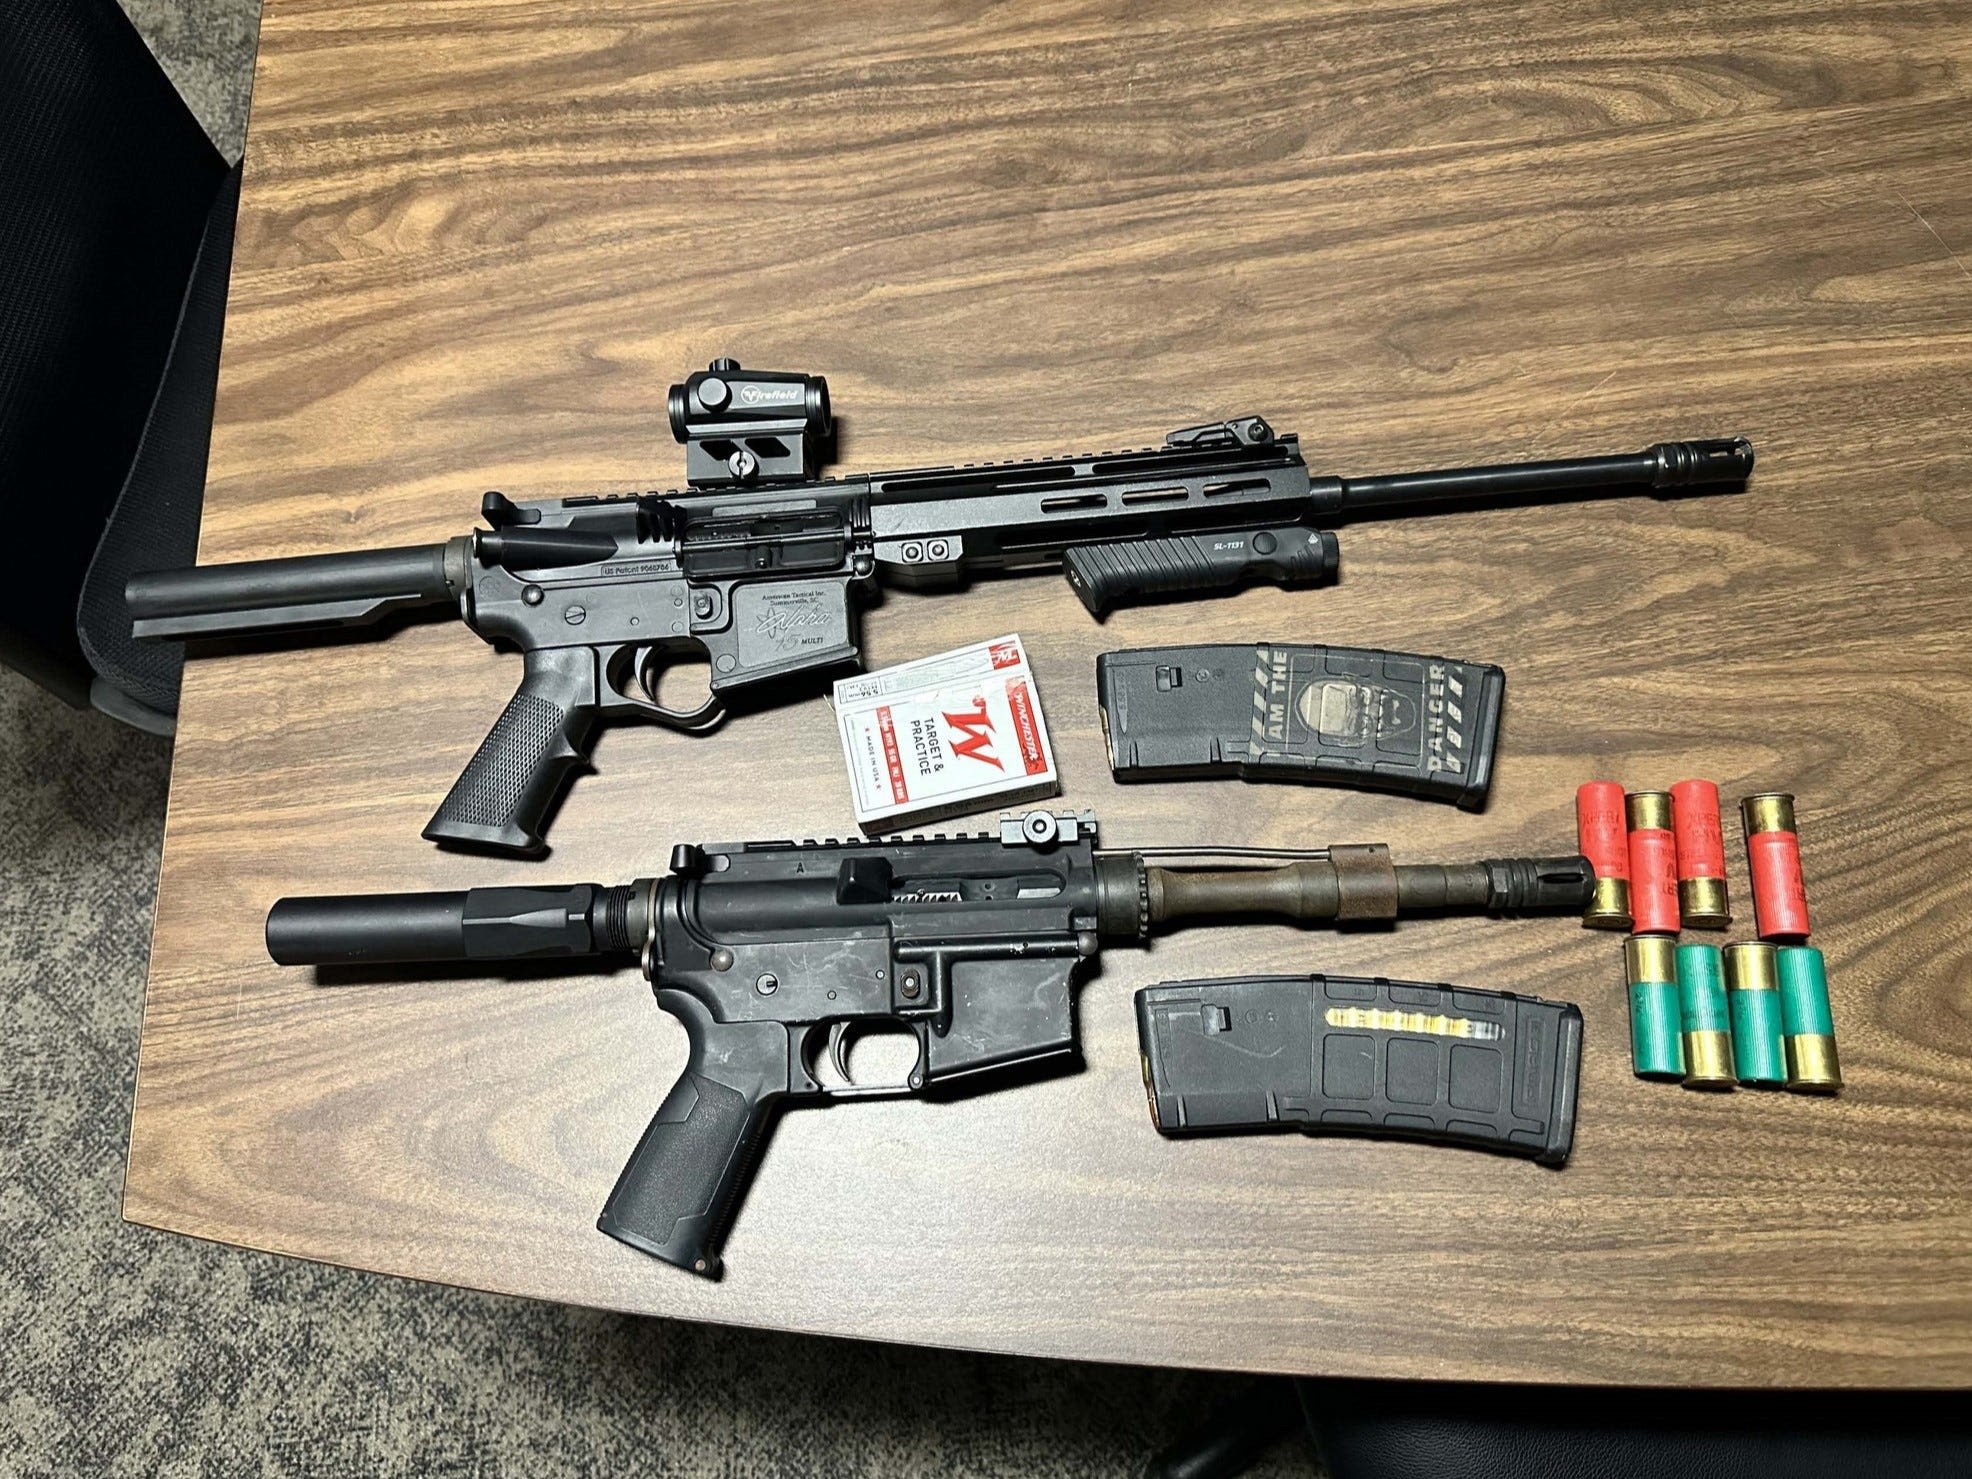 Monroe police seize rifles, discover caller tried to report crashed vehicle was stolen